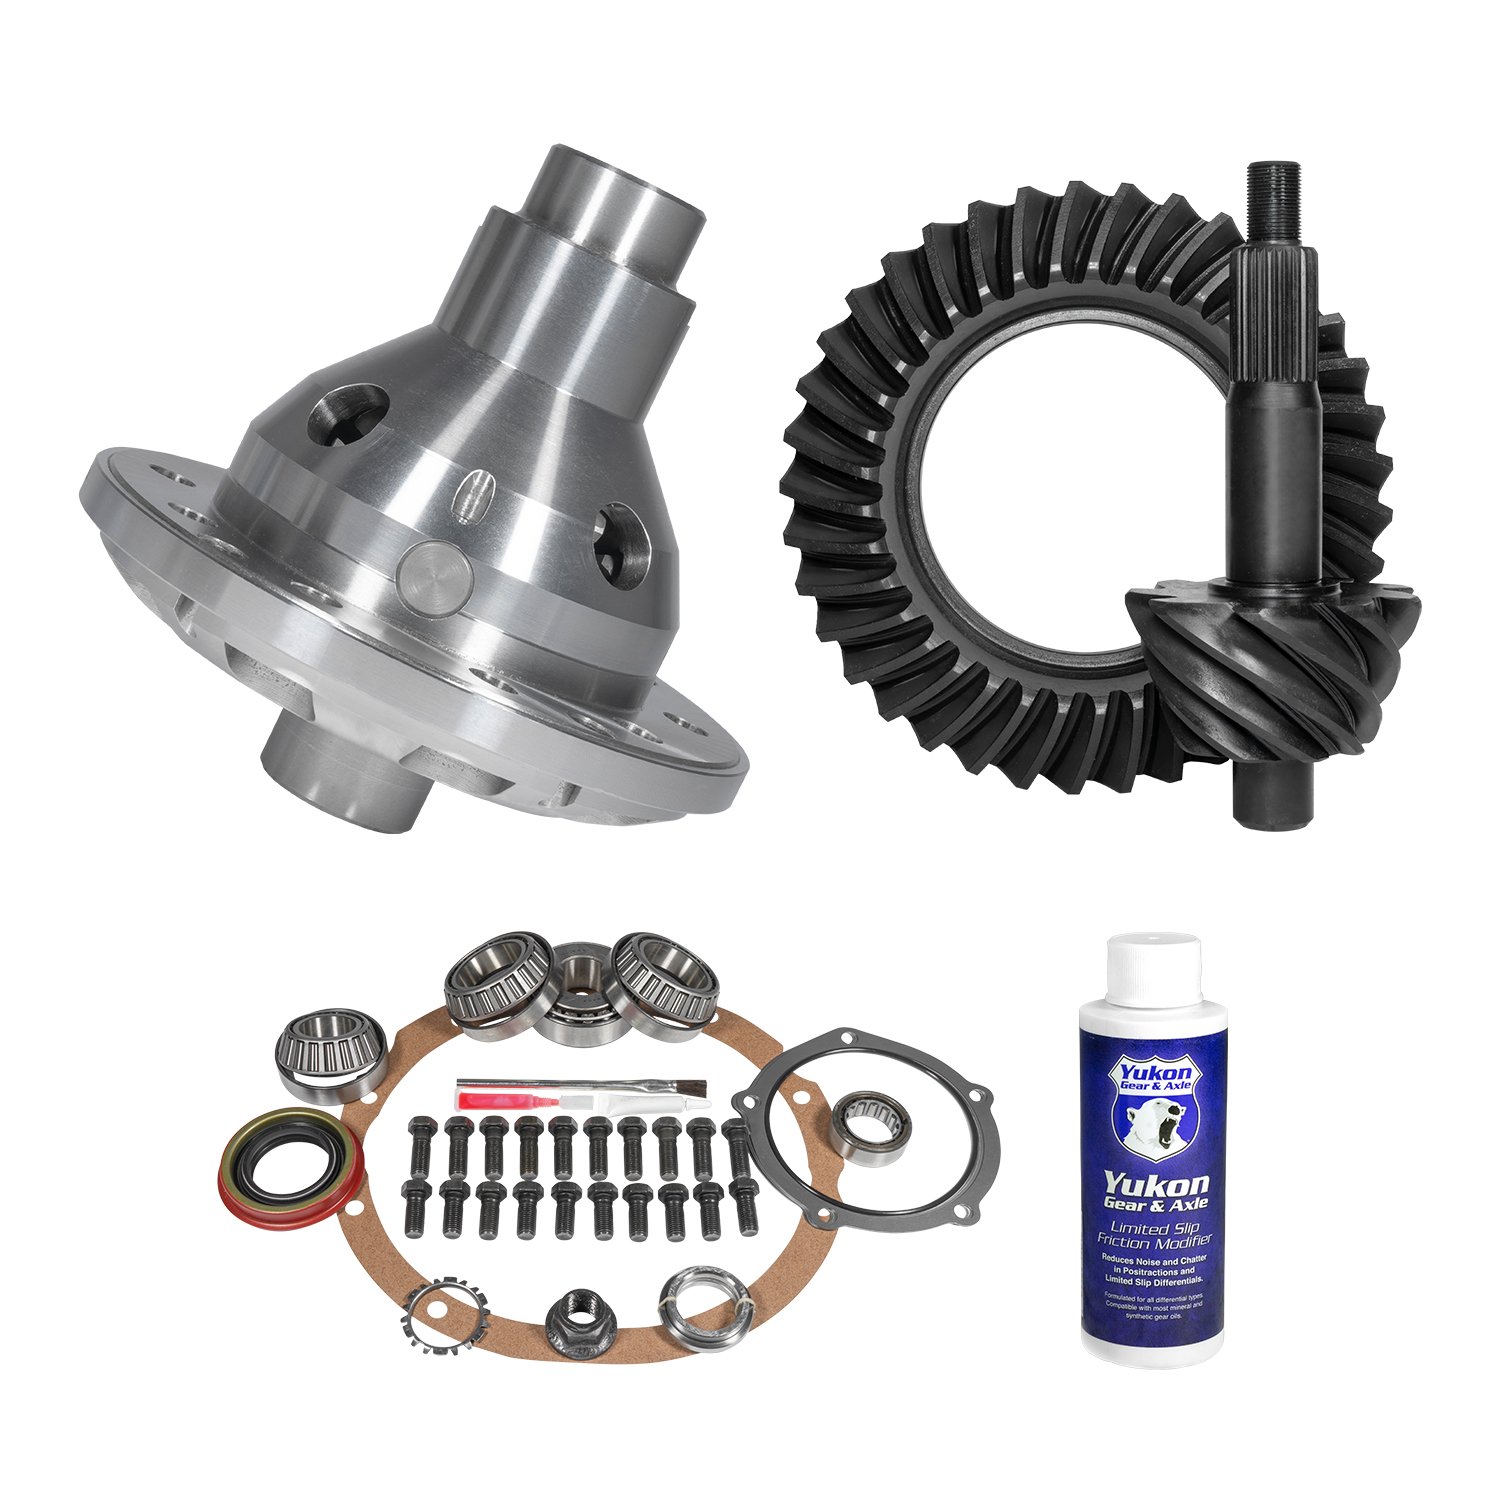 Muscle Car Limited Slip & Re-Gear Kit For Ford 9 in., 28 Spline, 3.25 Ratio